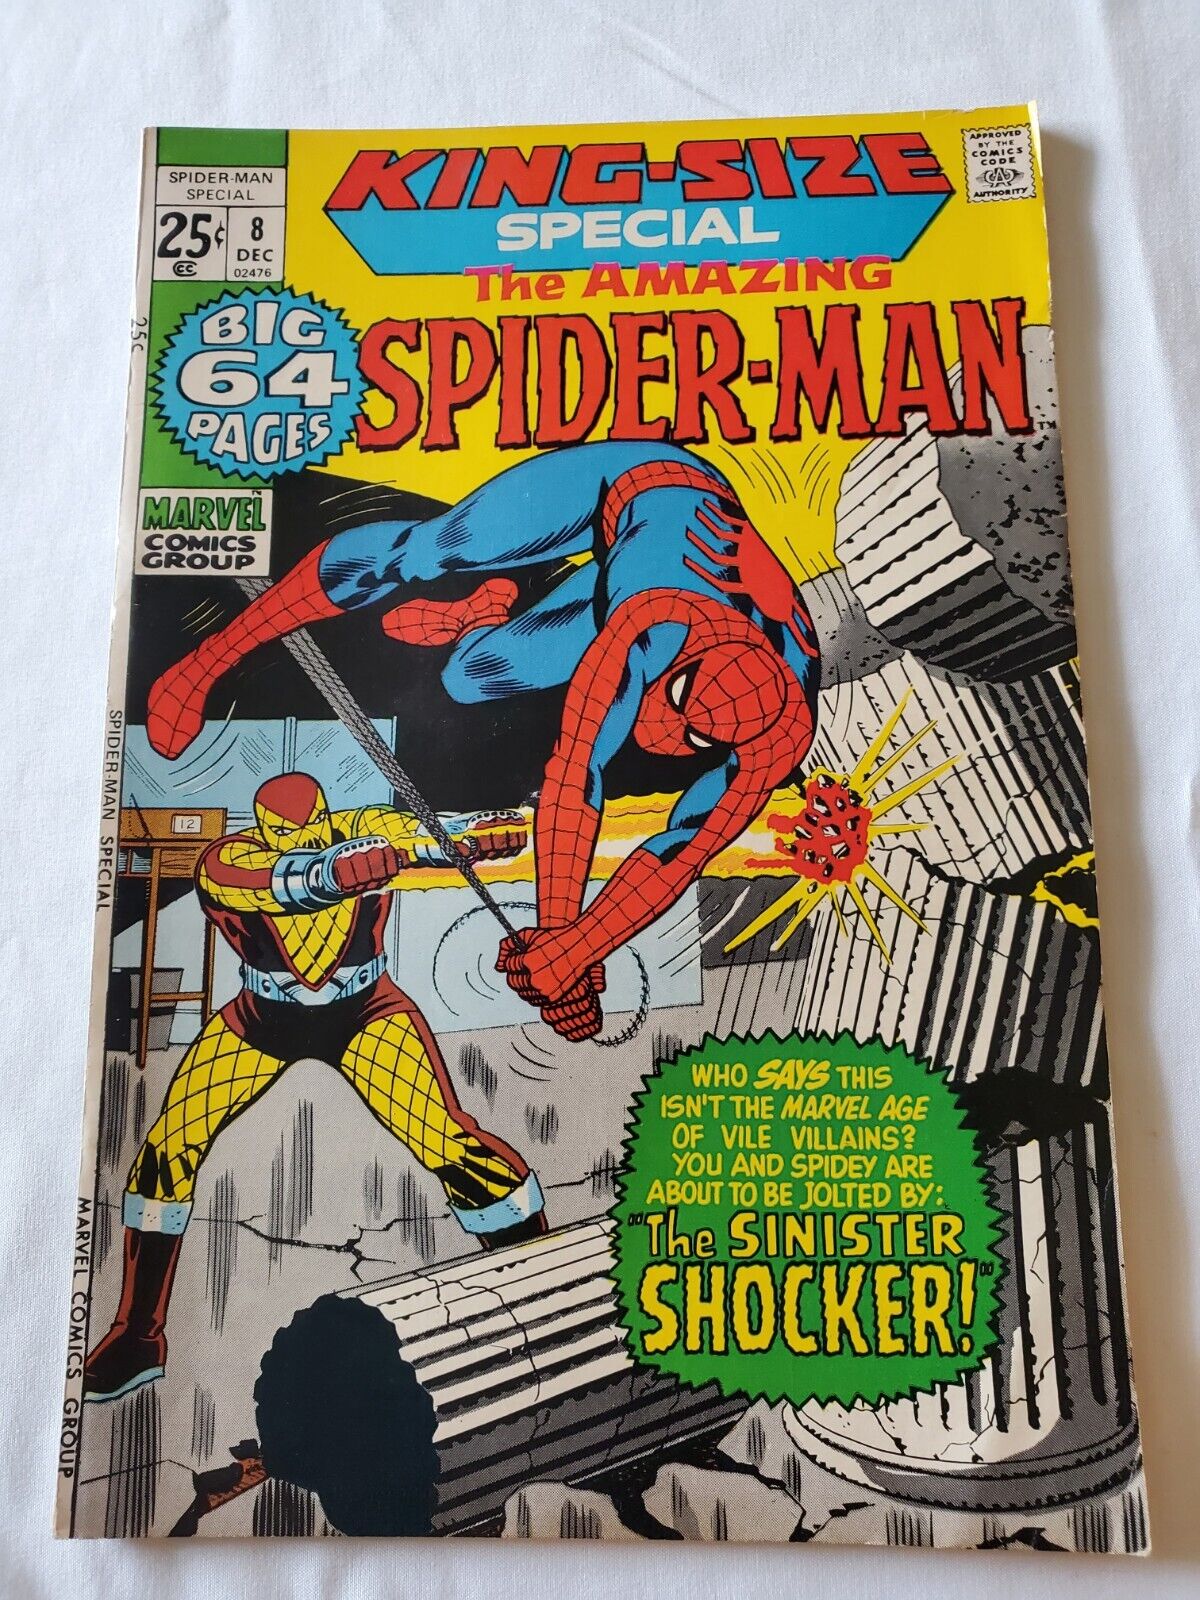 Rare 1971 Vol 1 Issue #8 King Size (Big 64 Pgs) The Amazing Spider-Man And...